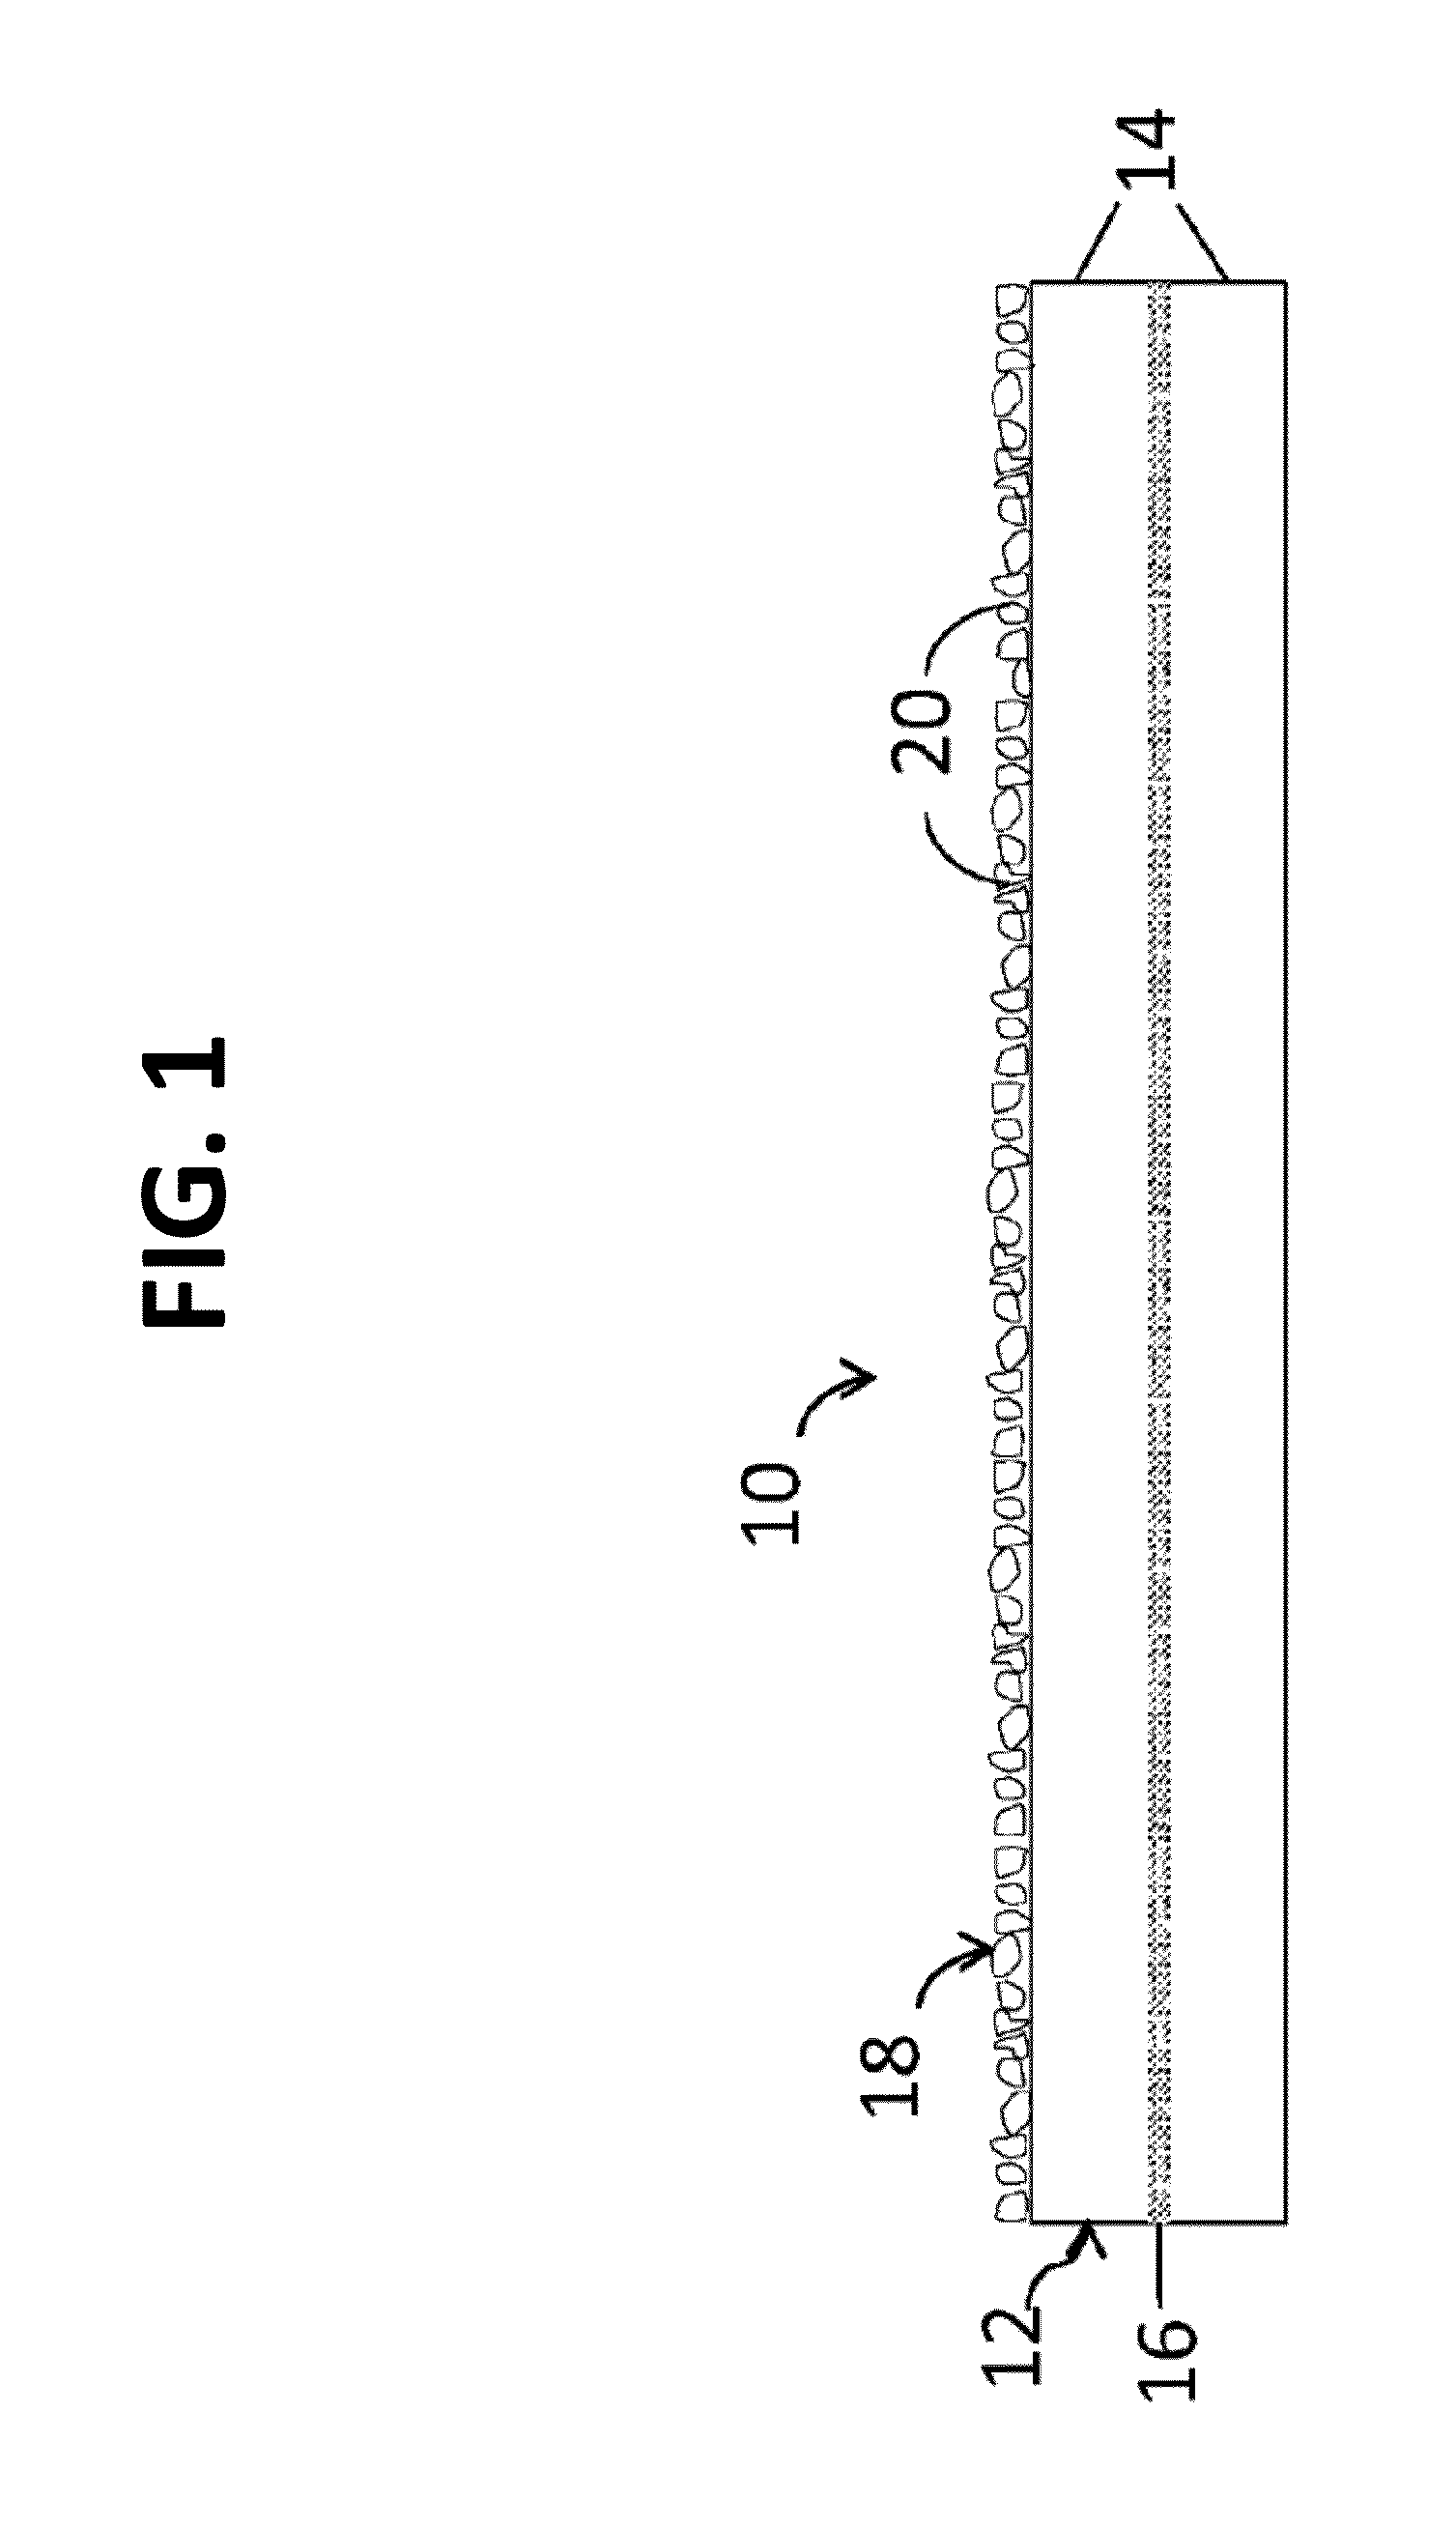 Highly reflective microcrystalline/amorphous materials, and methods for making and using the same